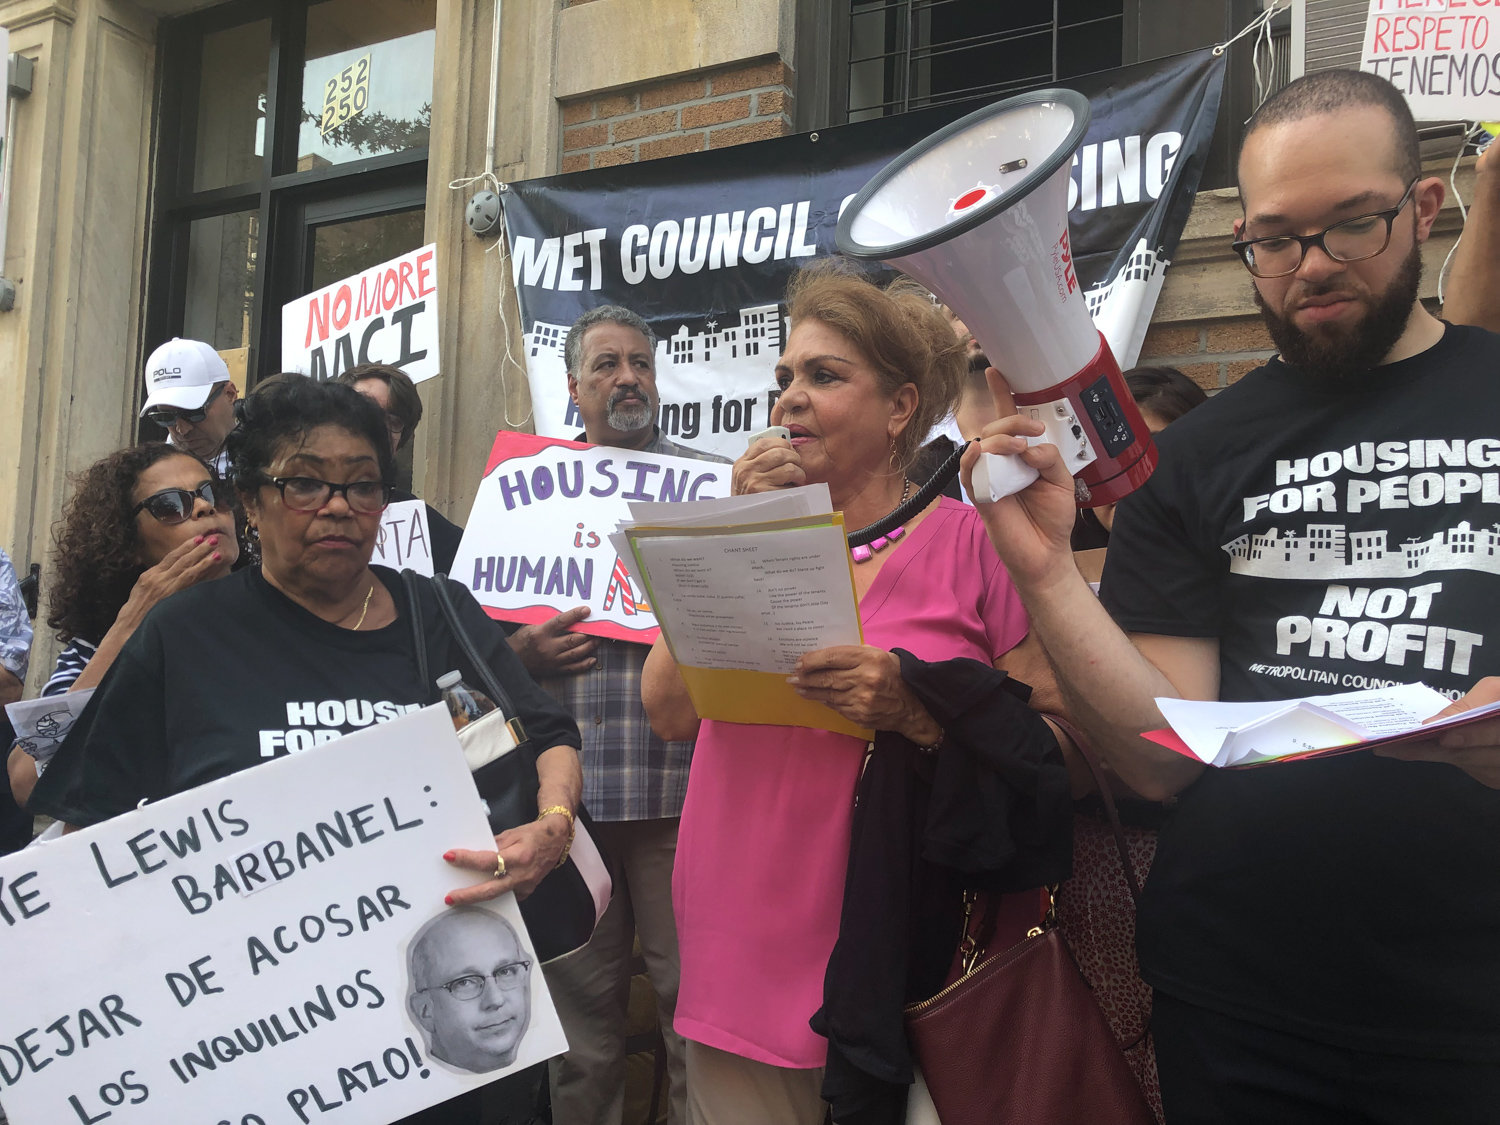 The Met Council on Housing has called for rents to be suspended through the duration of the coronavirus pandemic. While it can’t organize rallies, like the one seen here last year, they have partnered with lawmakers like state Sen. Gustavo Rivera to put pressure on Gov. Andrew Cuomo, who has only restricted evictions during the crisis.